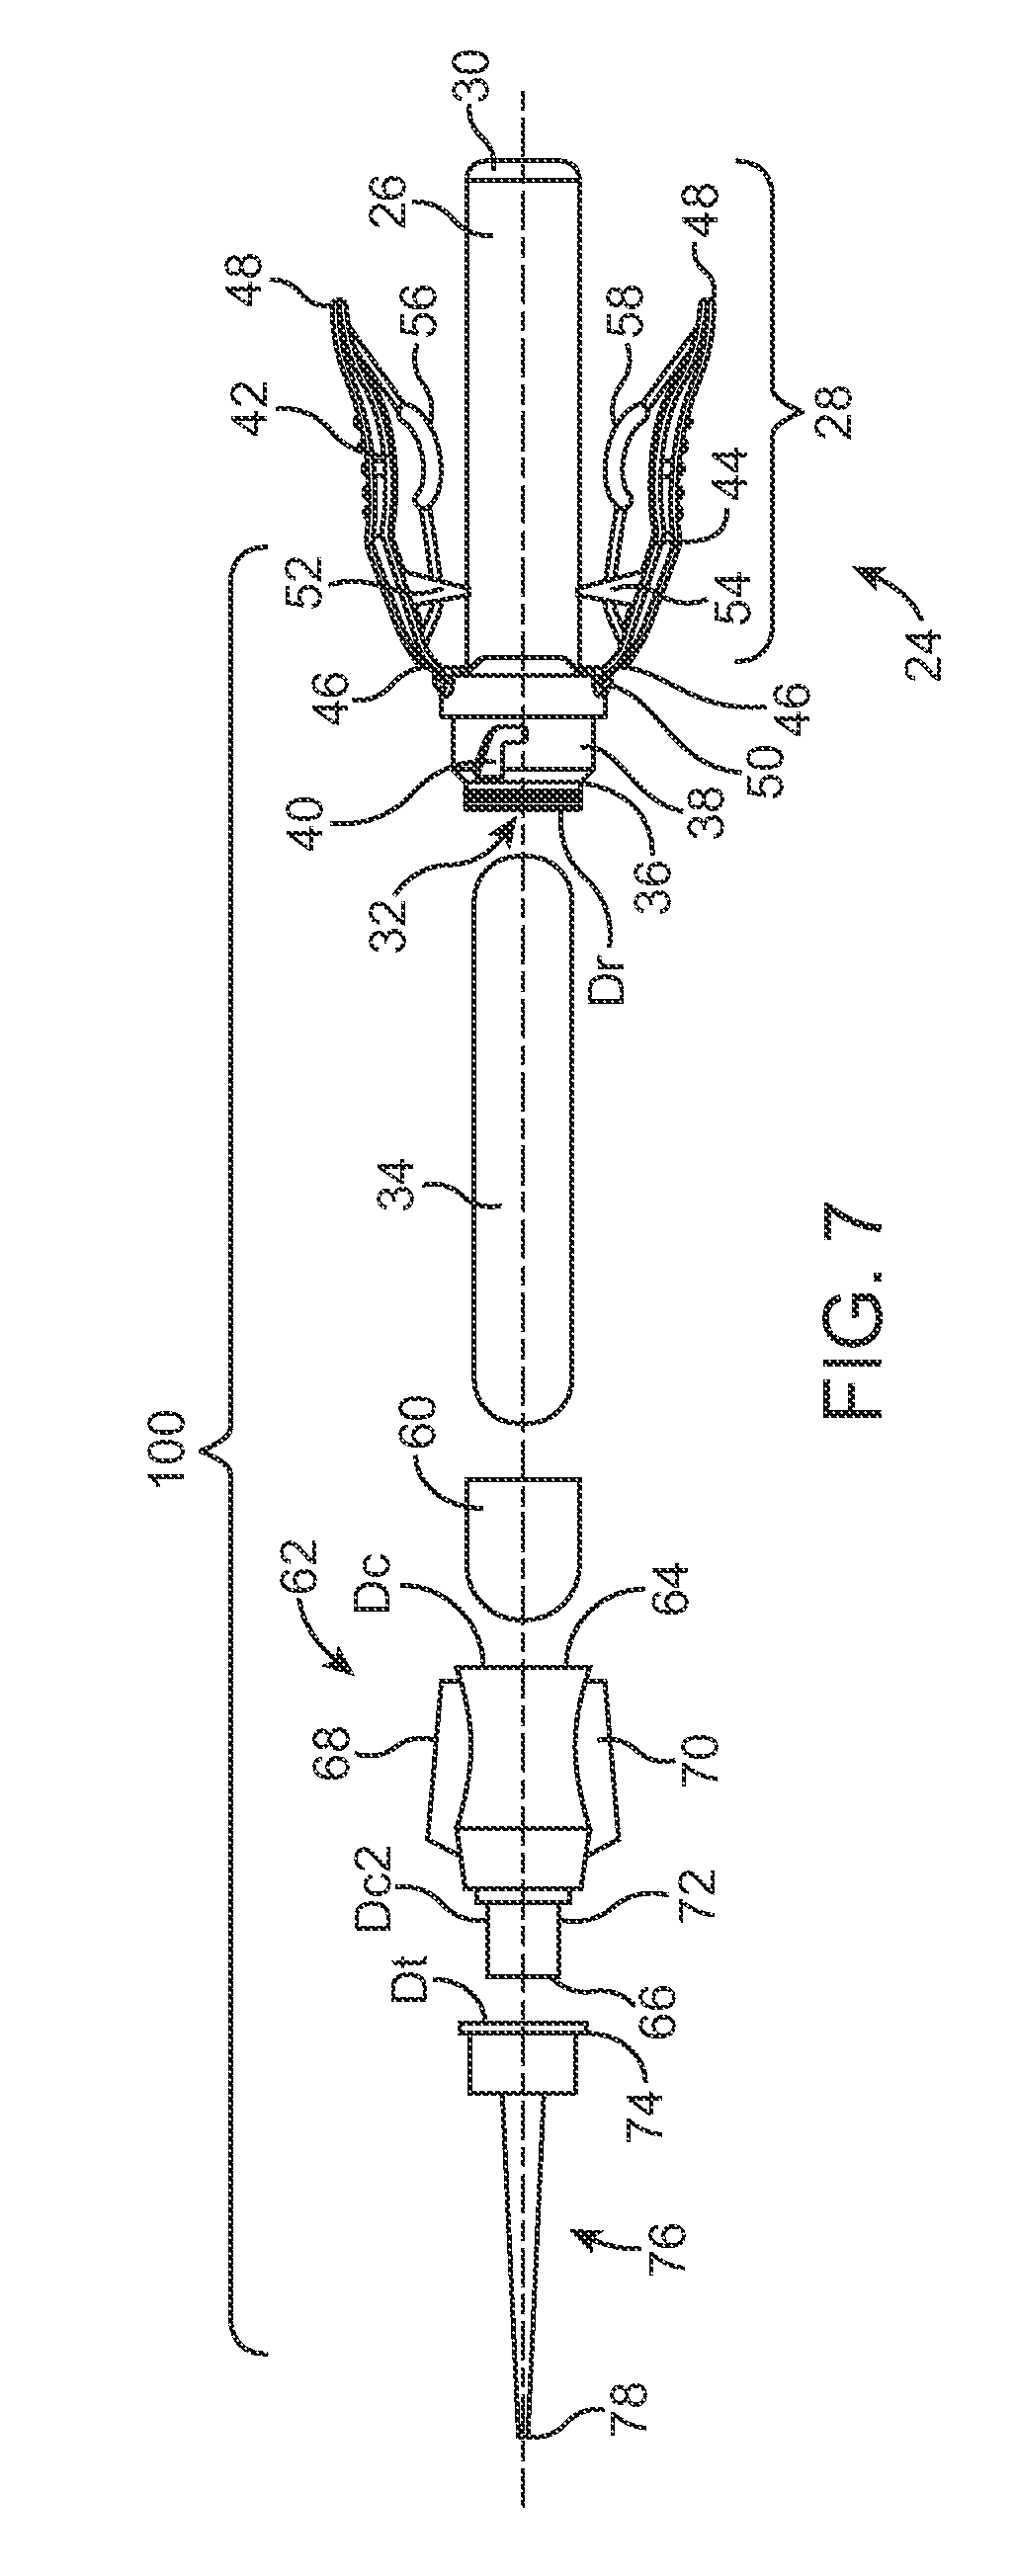 Surgical adhesive applicator